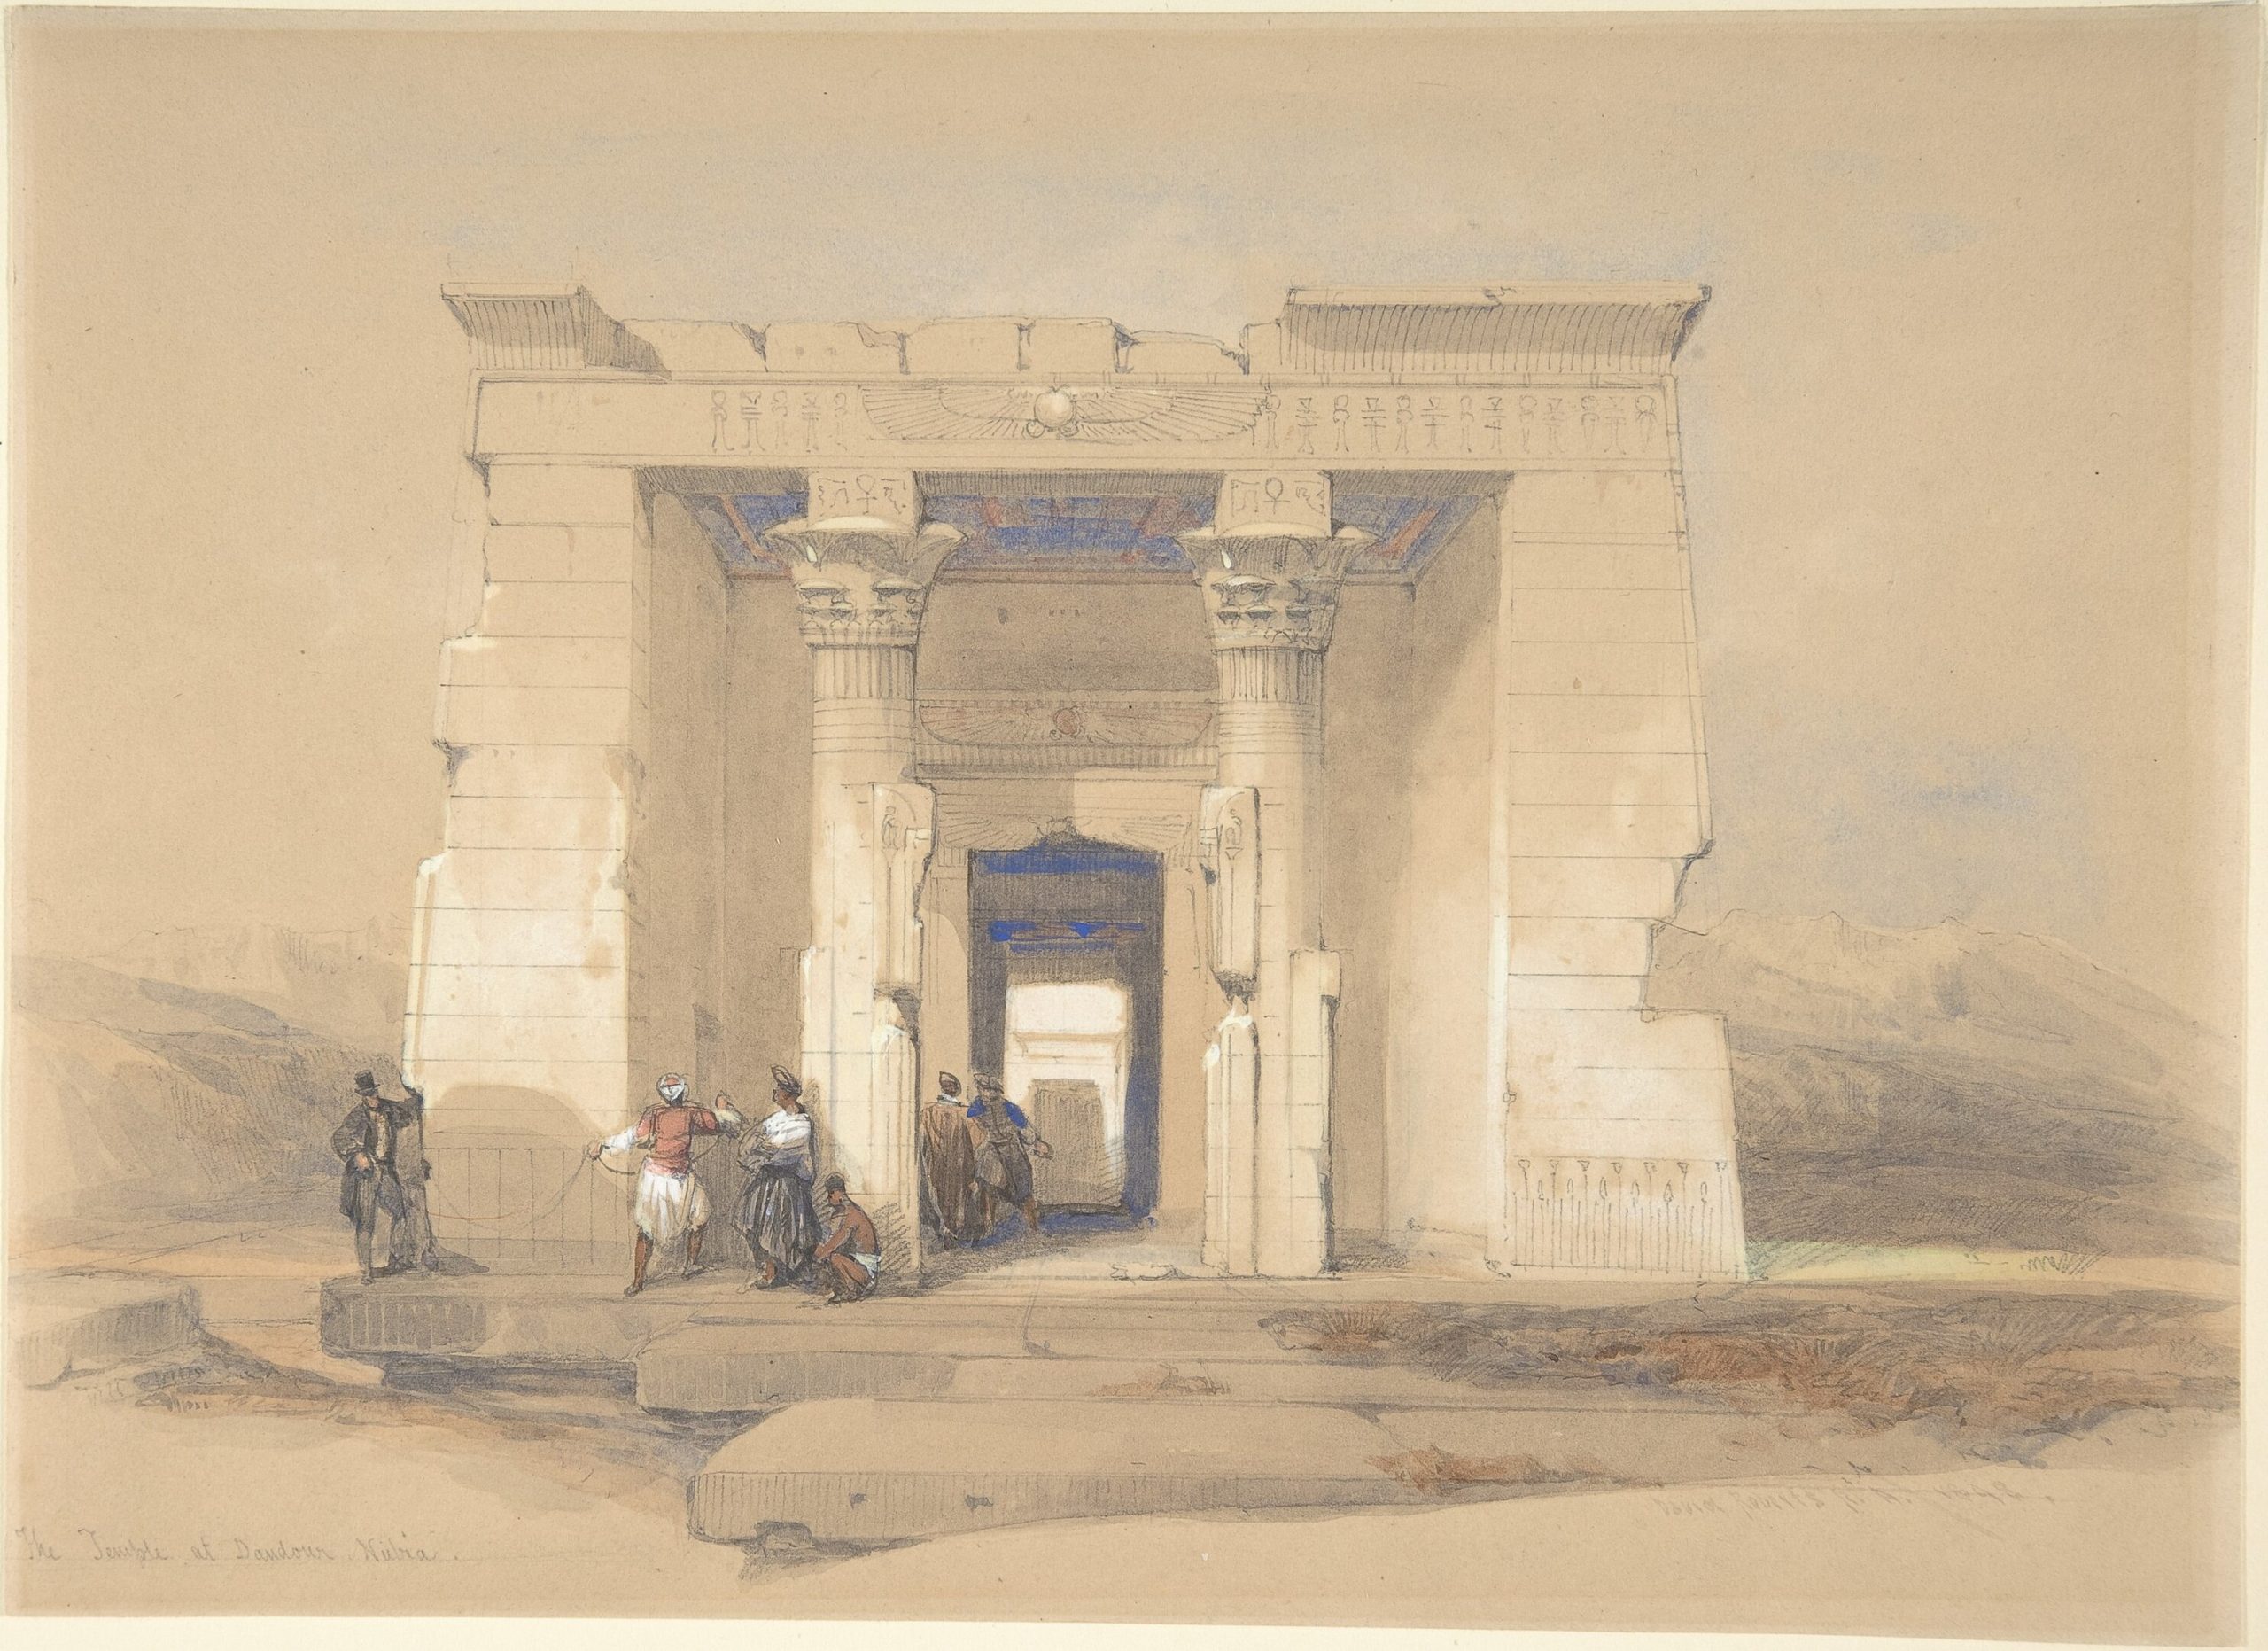 A landscape view of an Egyptian temple in a desert with several explorers gathered around an entrance